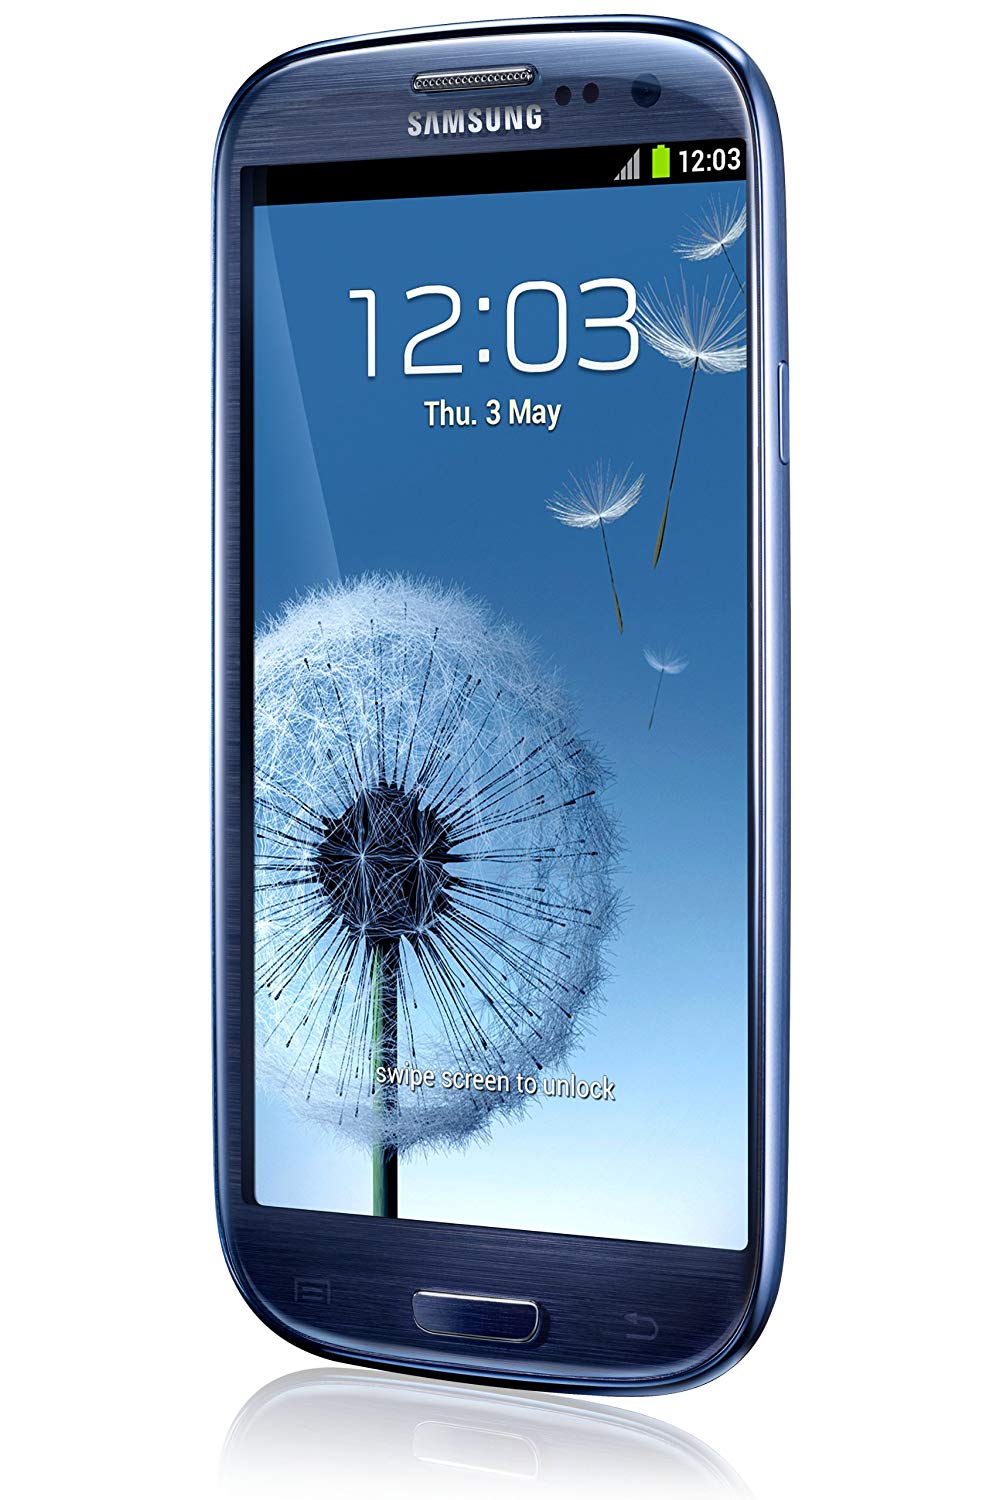 Samsung Galaxy S III T999 16GB T-Mobile GSM Android Smartphone- Pebbel ...